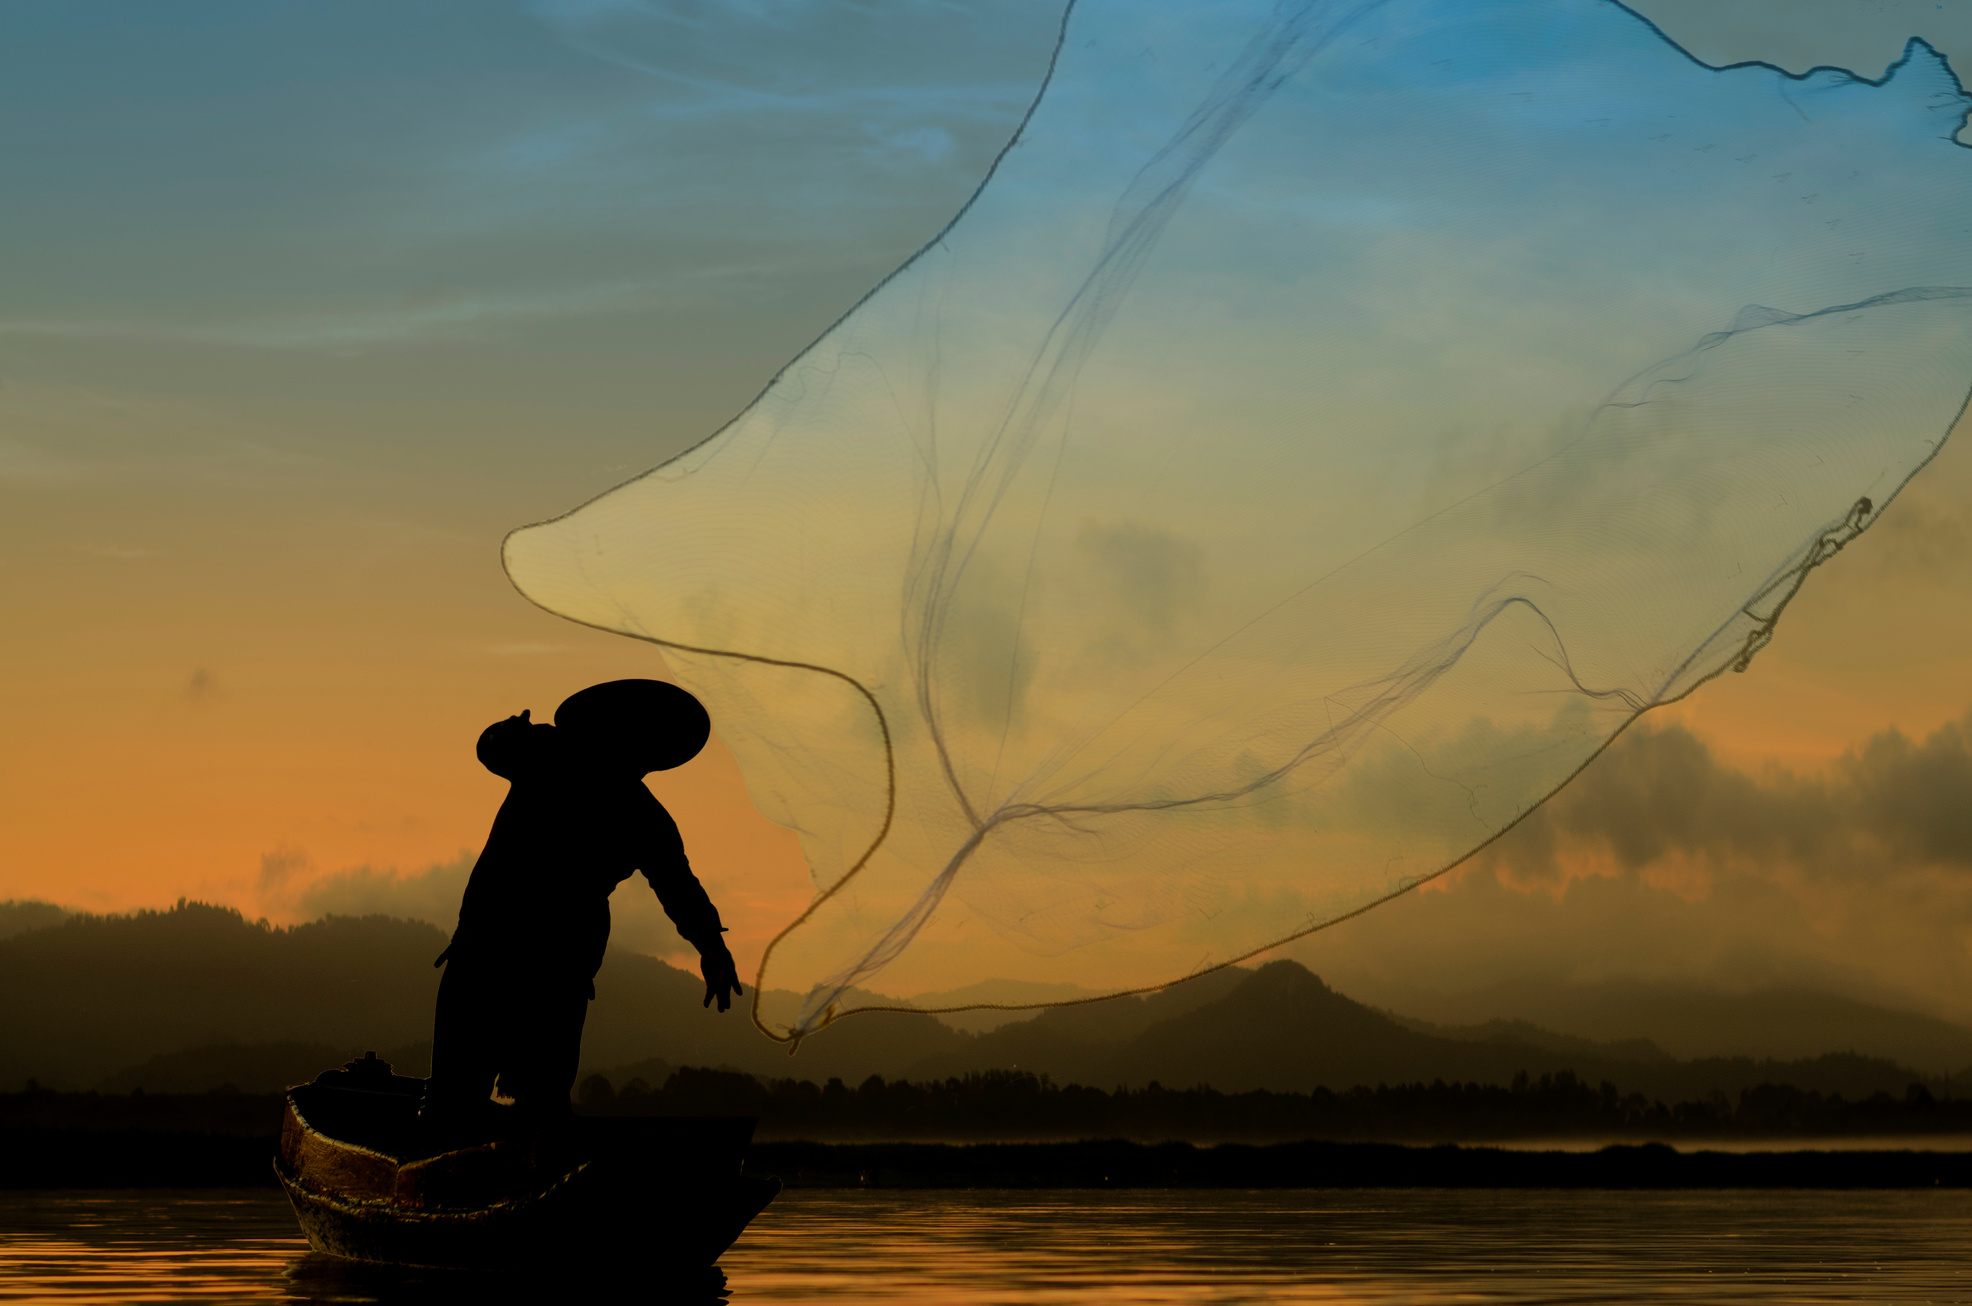 Fisherman in action when cast a net